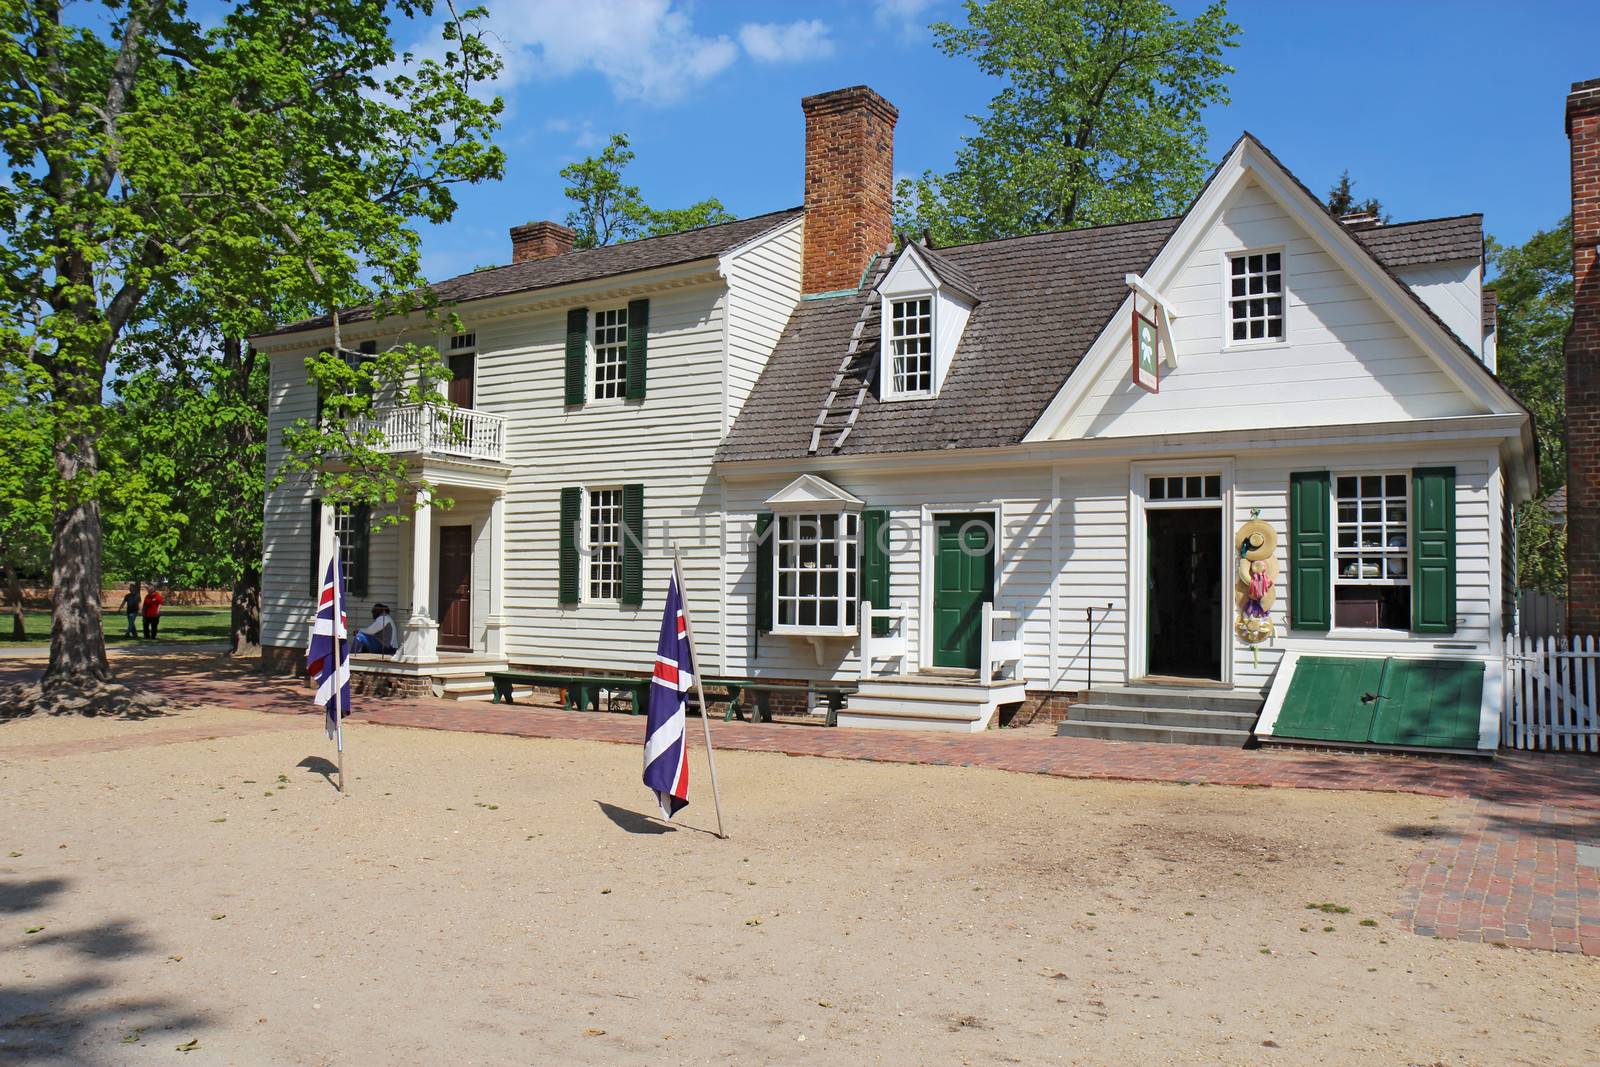 Mary Dickinson shop in the center of Colonial Williamsburg, Virg by sgoodwin4813